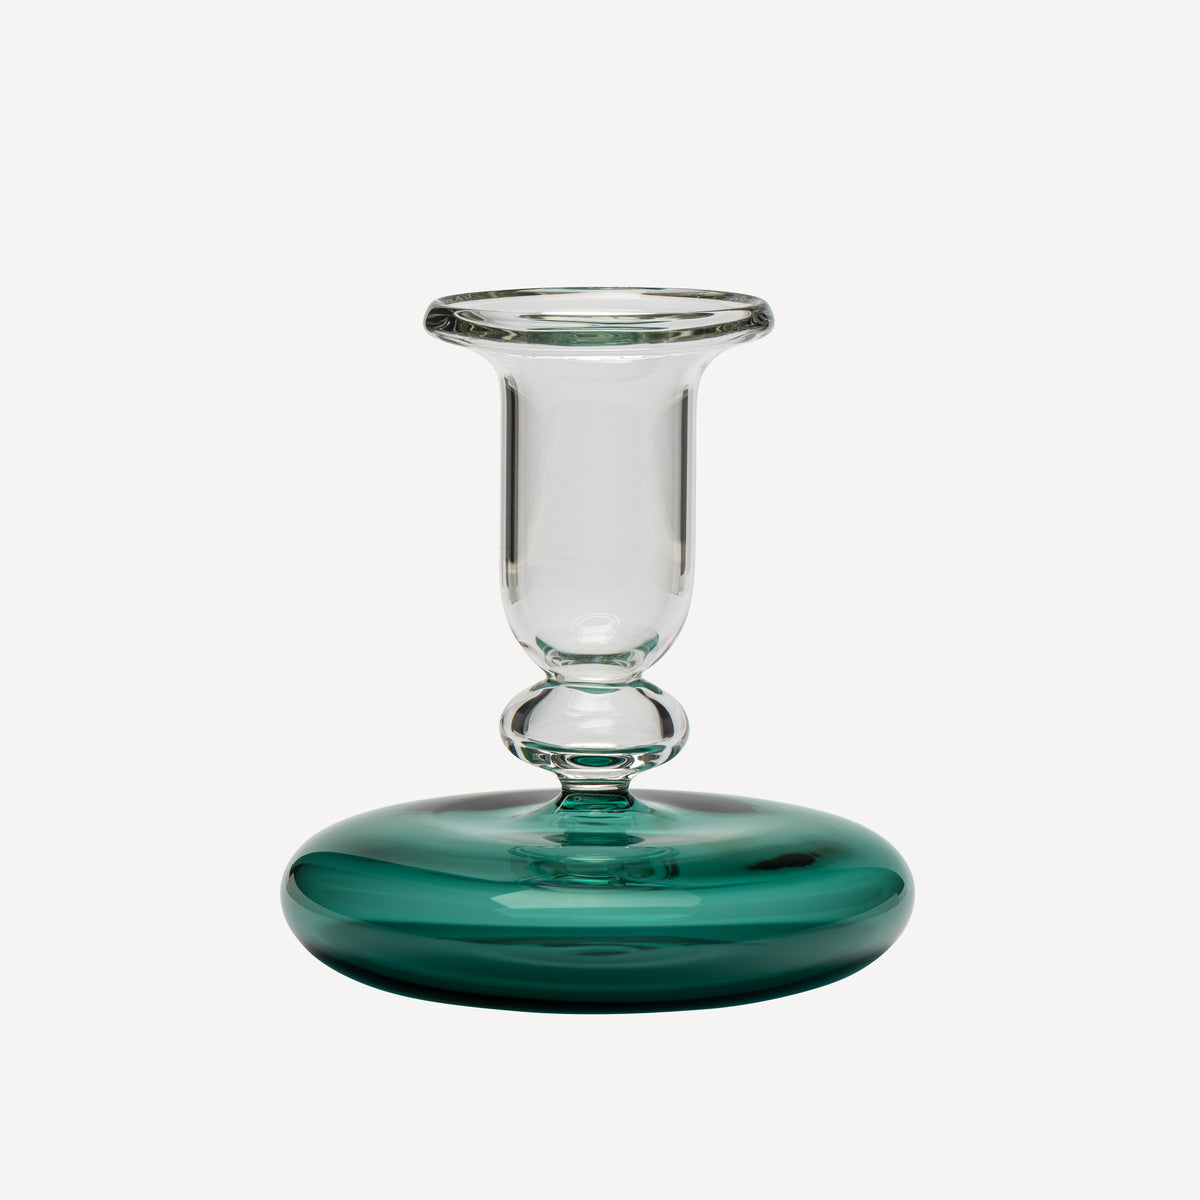 Pebble Glass Candlestick - Teal